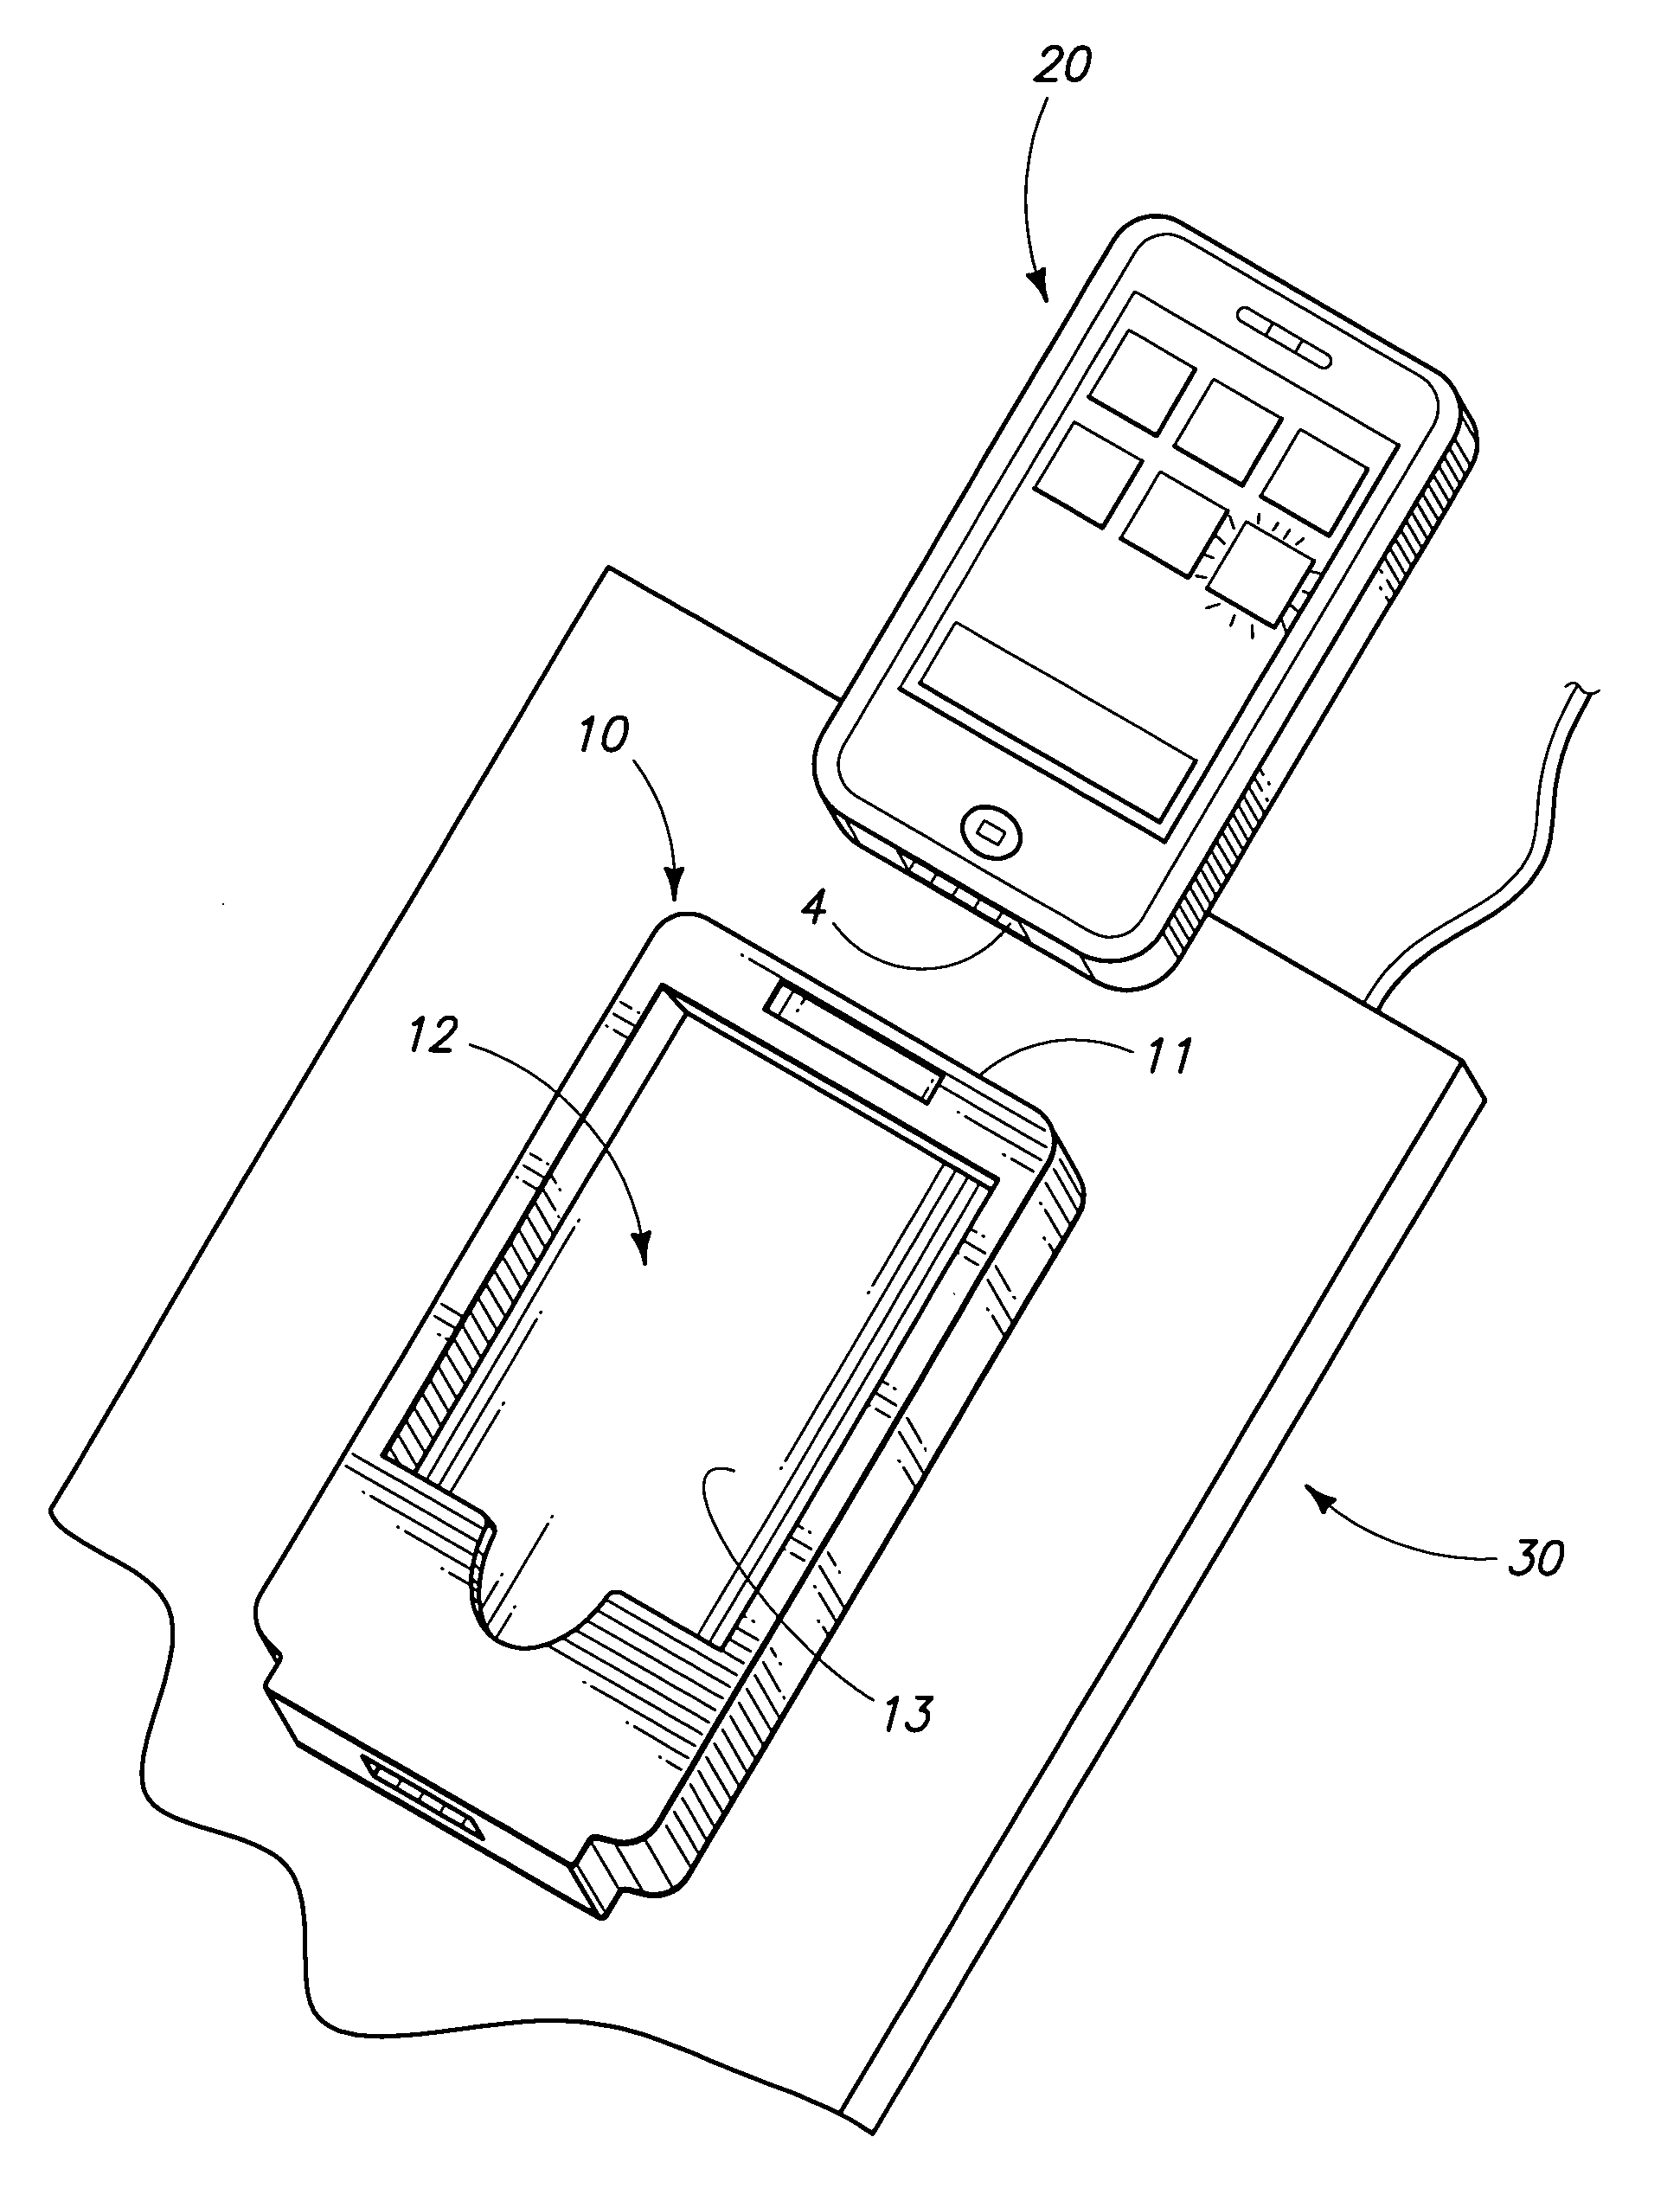 Inductively powered sleeve for mobile electronic device